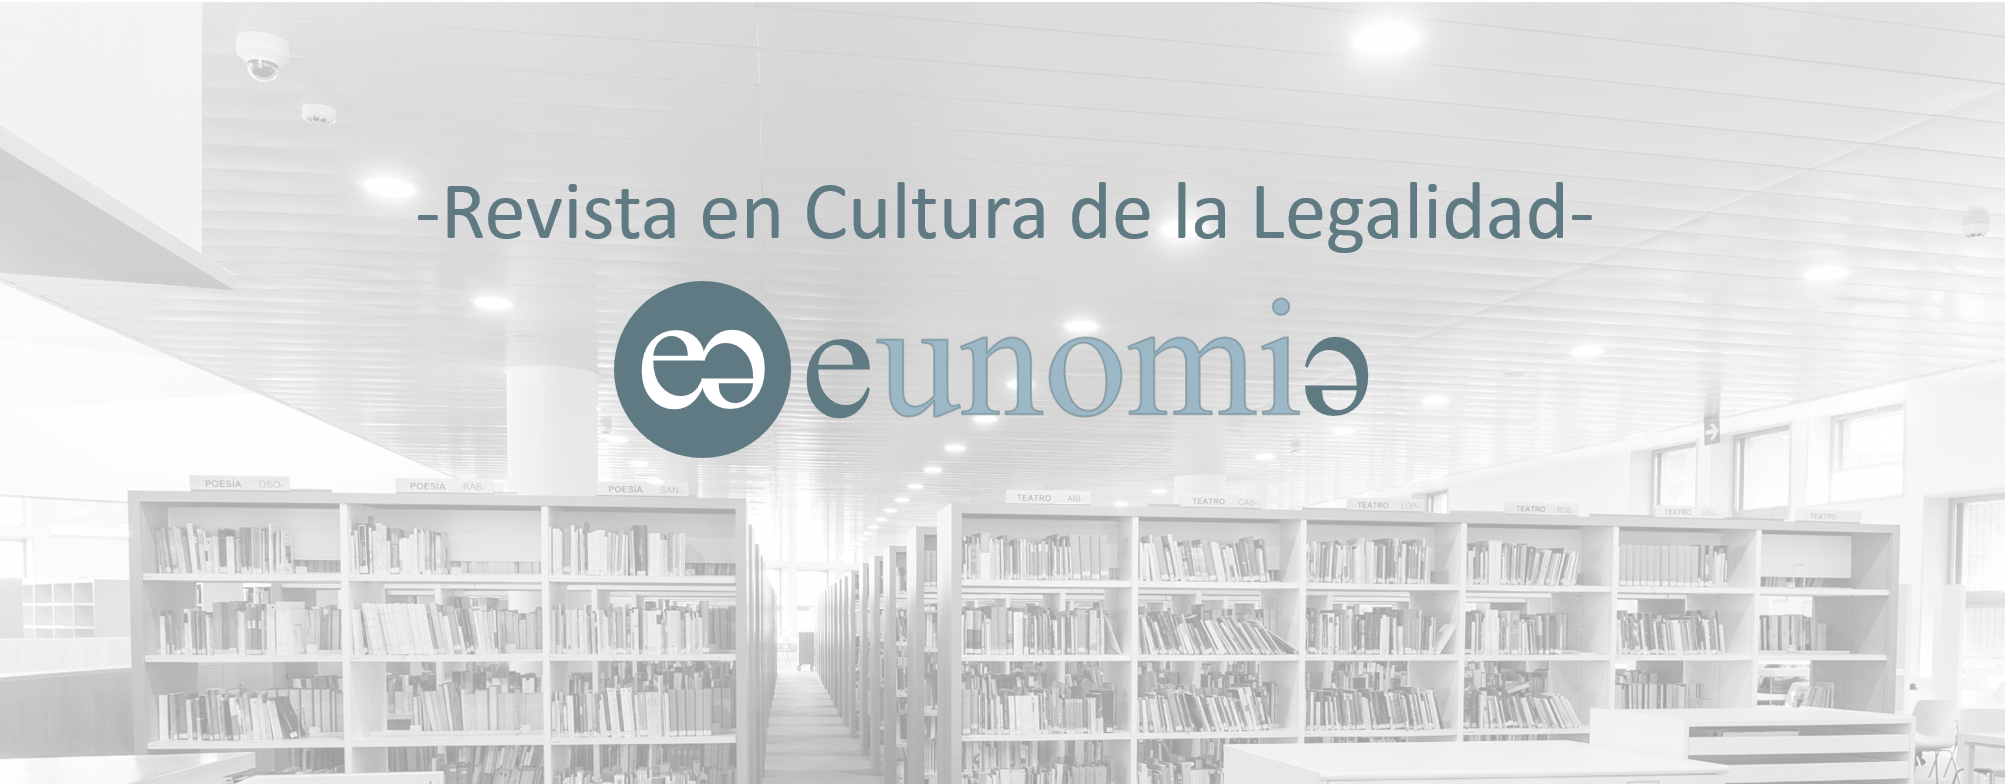 23rd Issue of Eunomía. Journal on Culture of Lawfulness